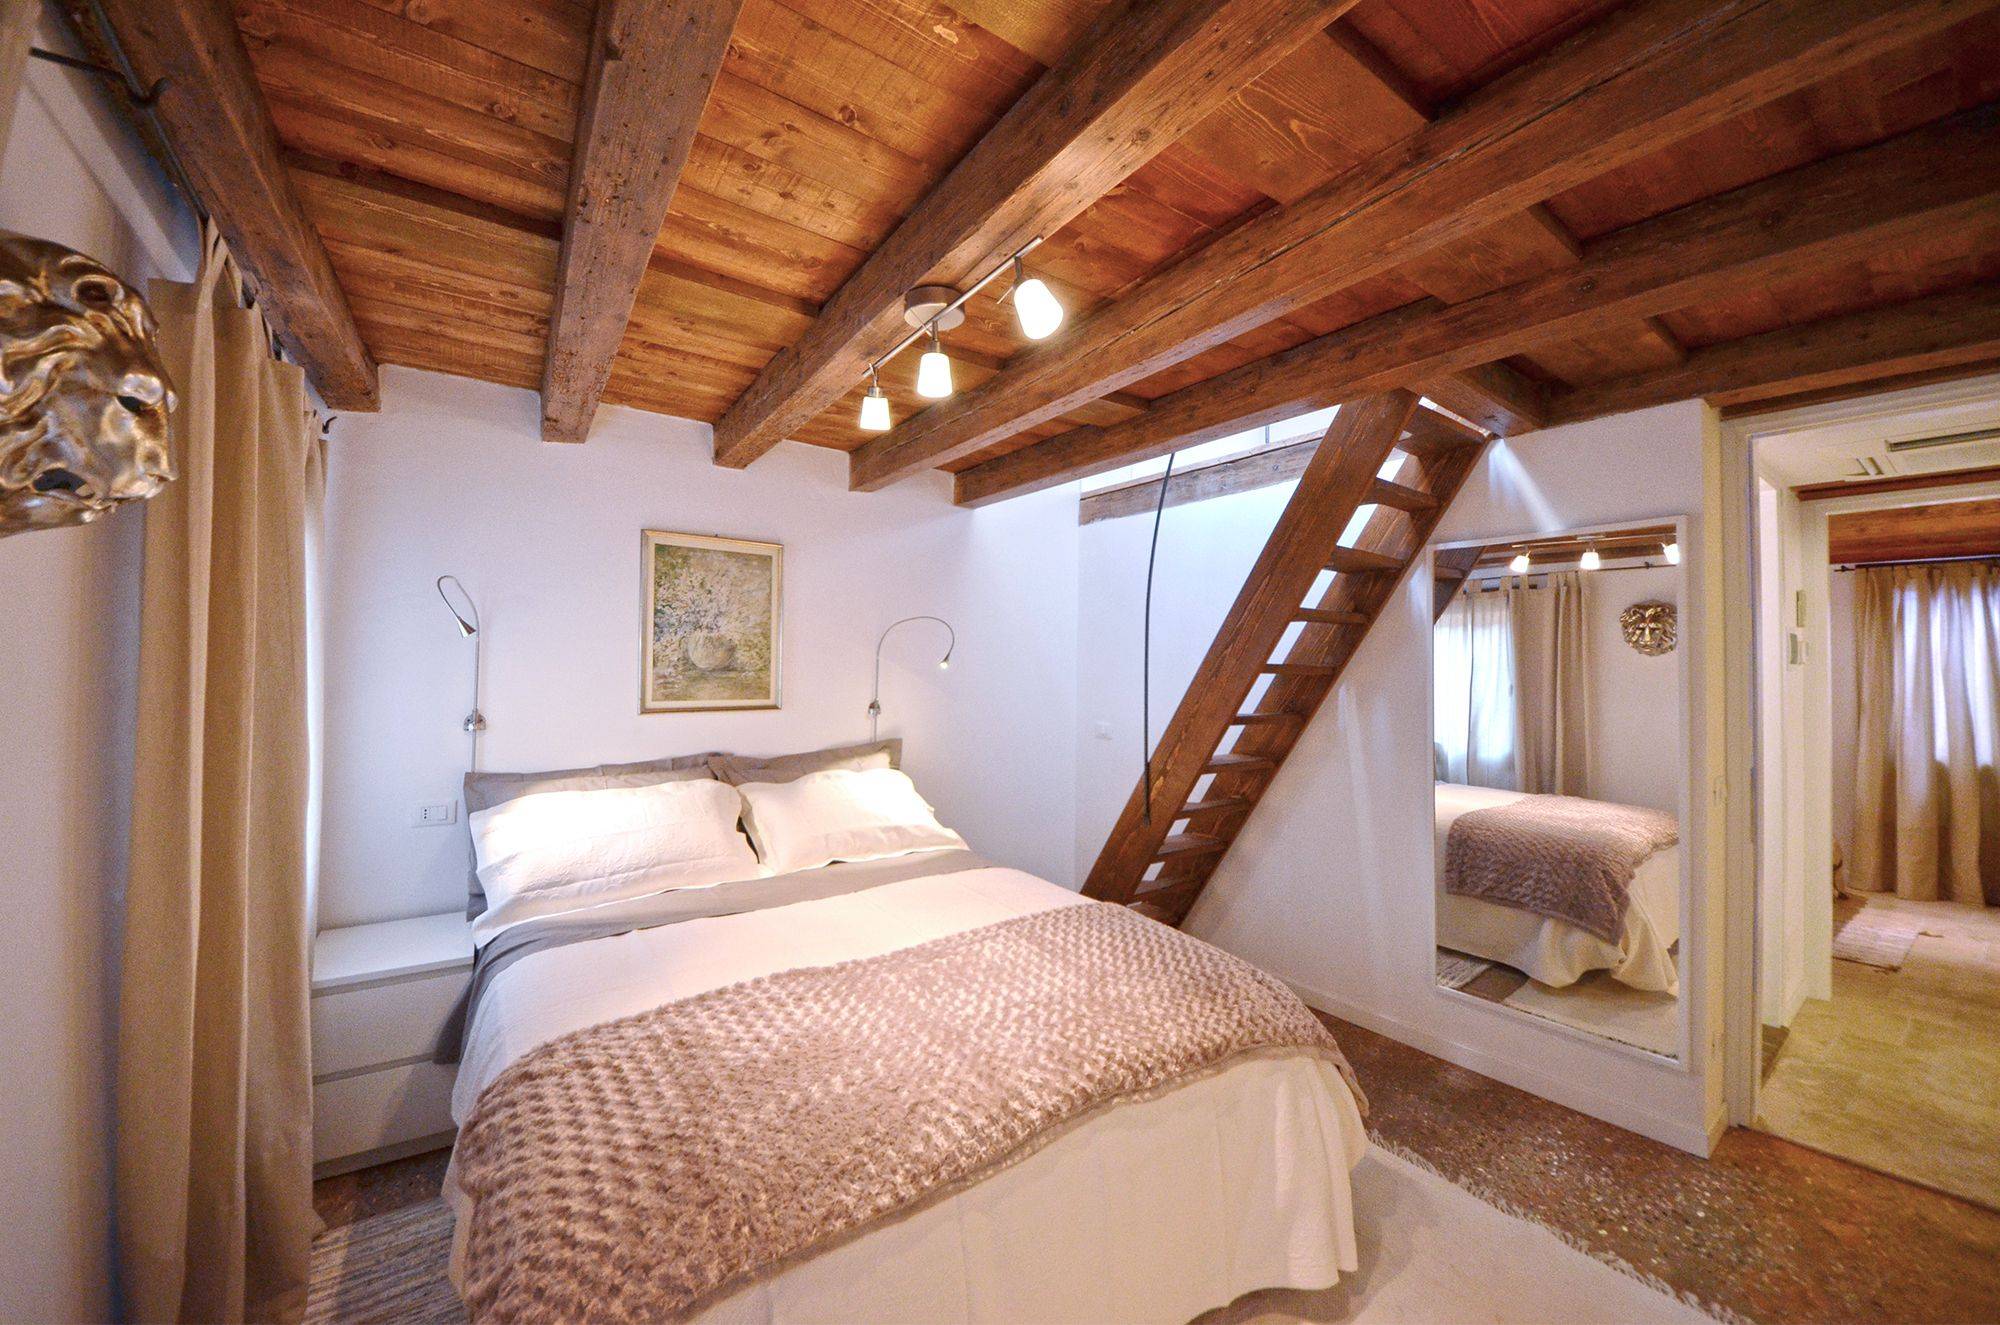 the double bedroom has plenty of wardrobe space and a staircase to the attic